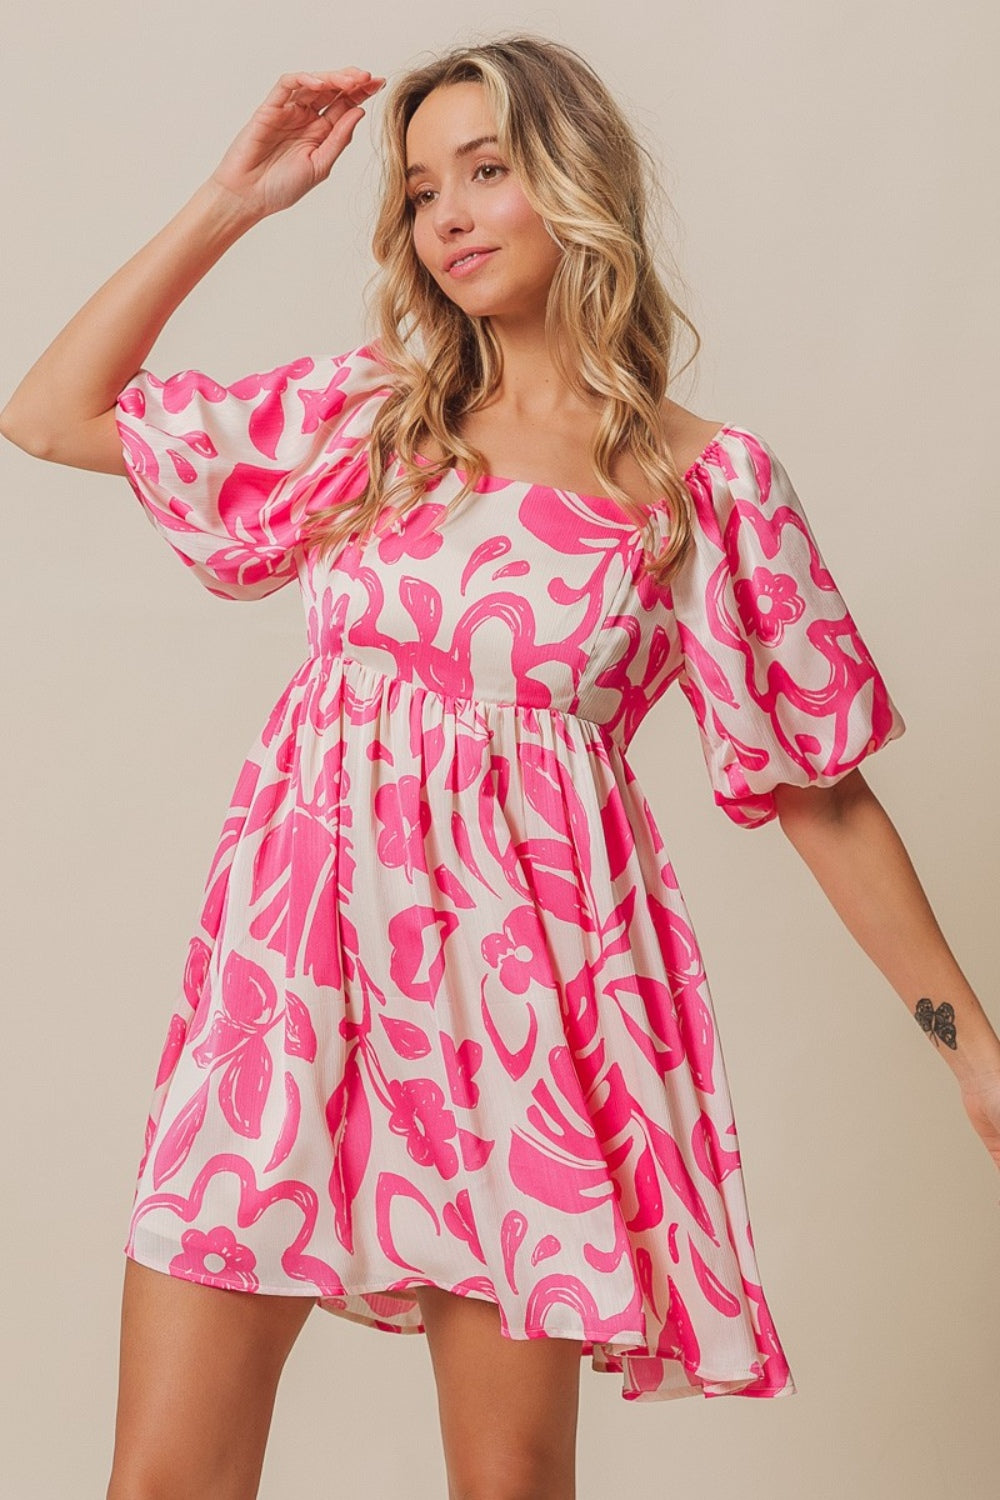 Living Life Fully Floral Dress